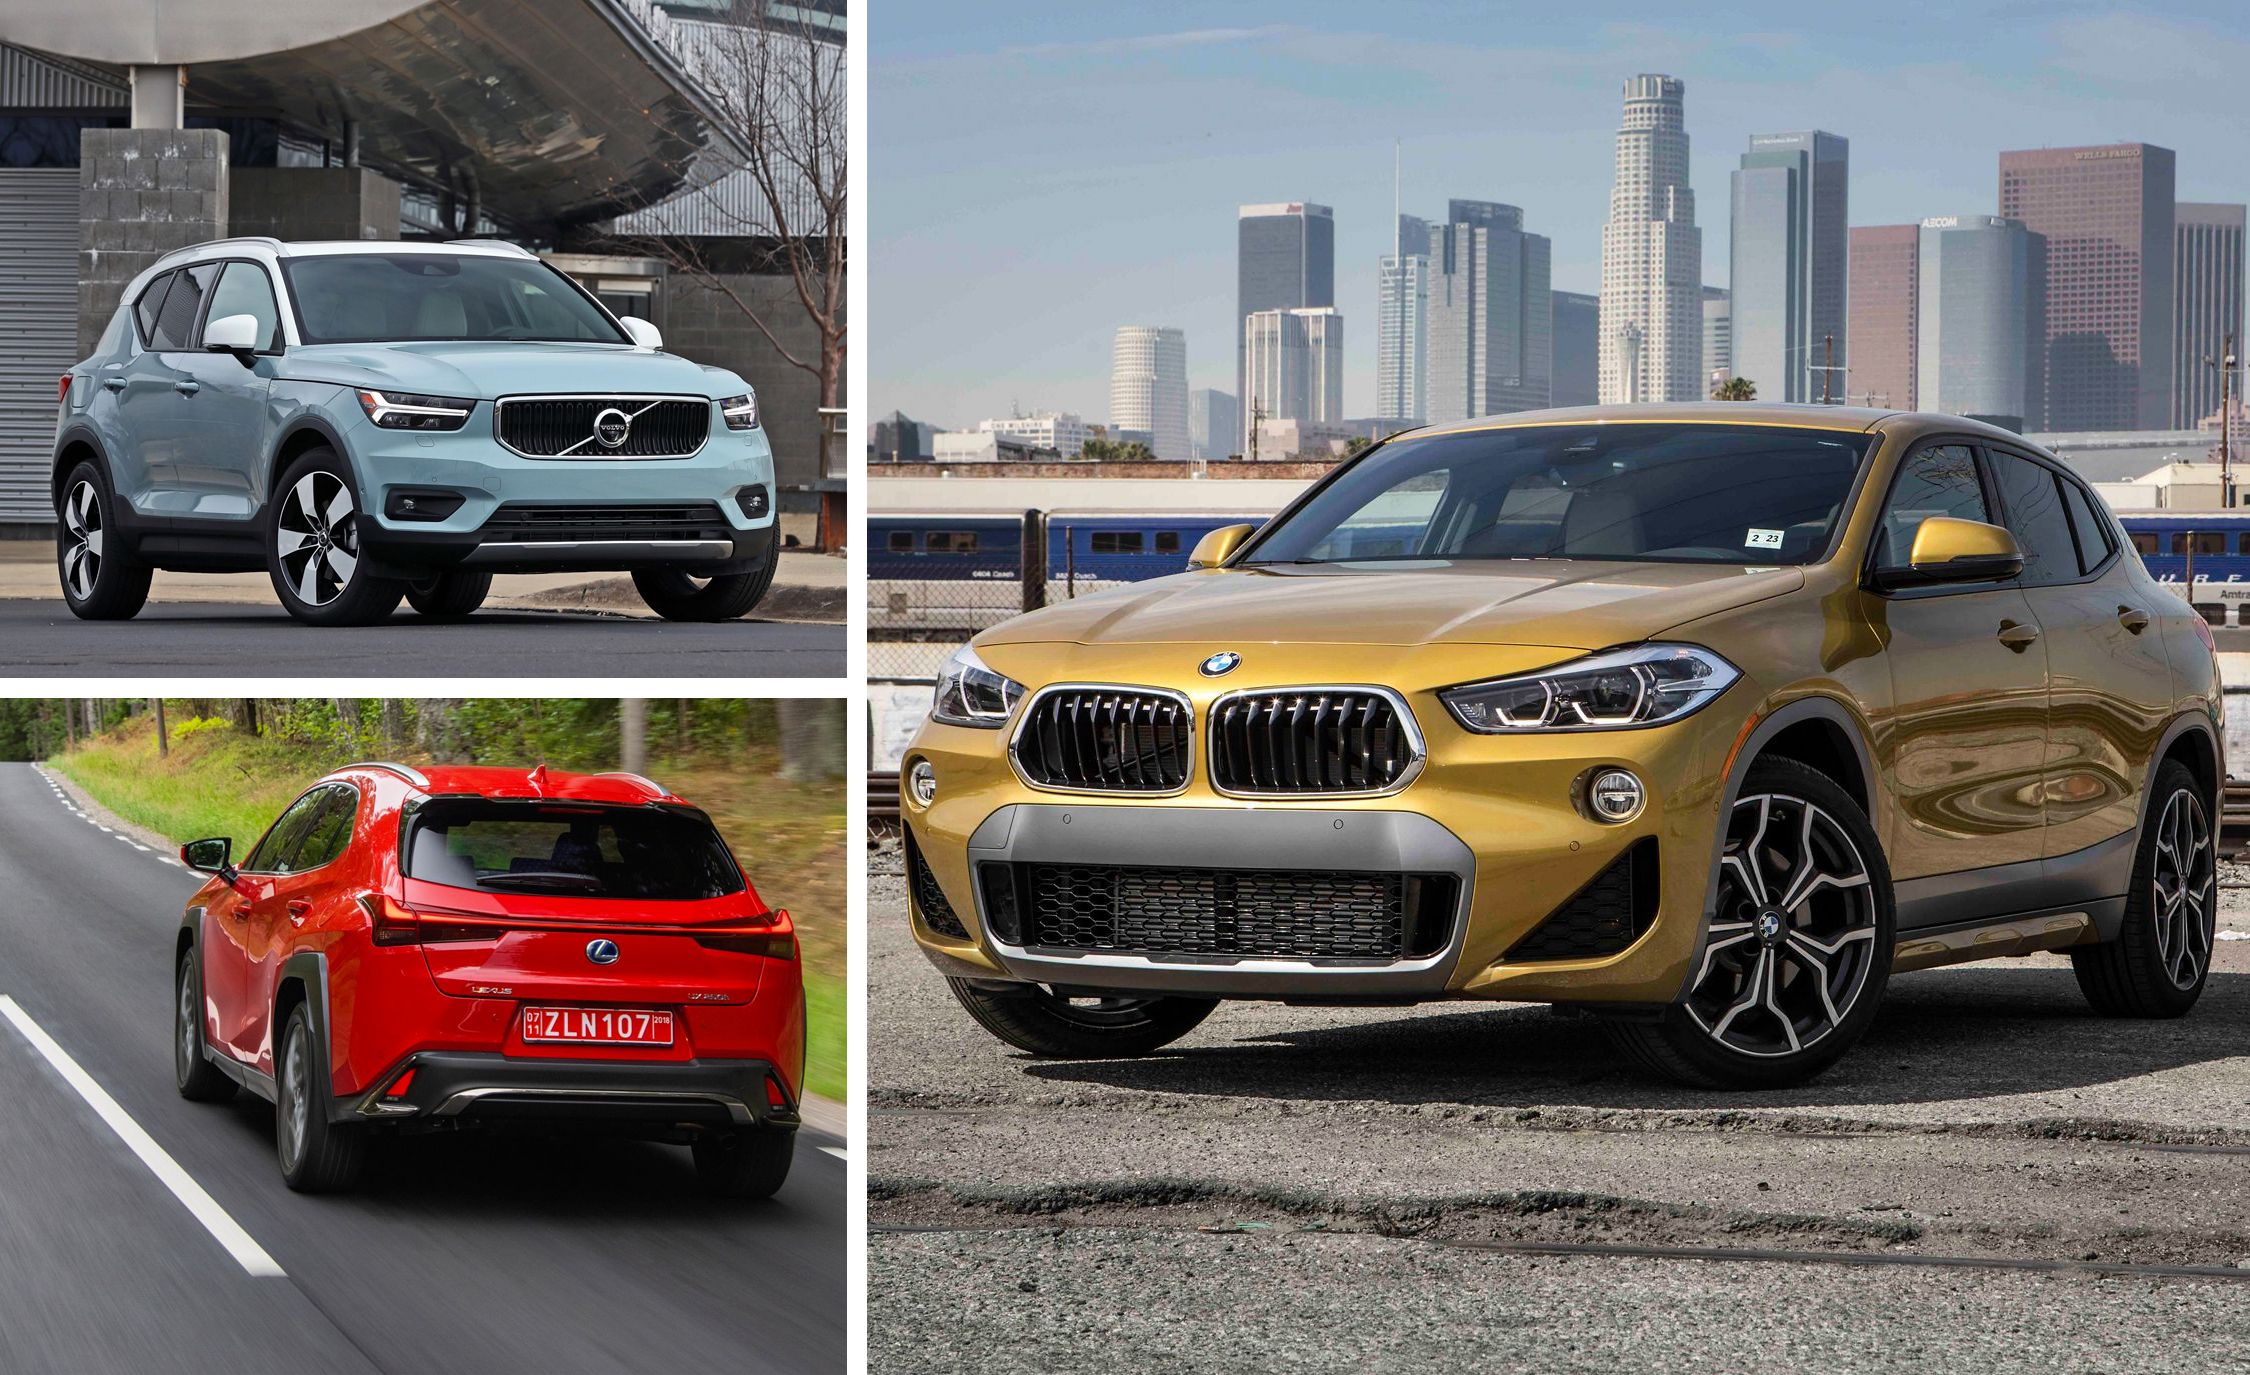 Every Subcompact Luxury Crossover Suv Ranked From Worst To Best